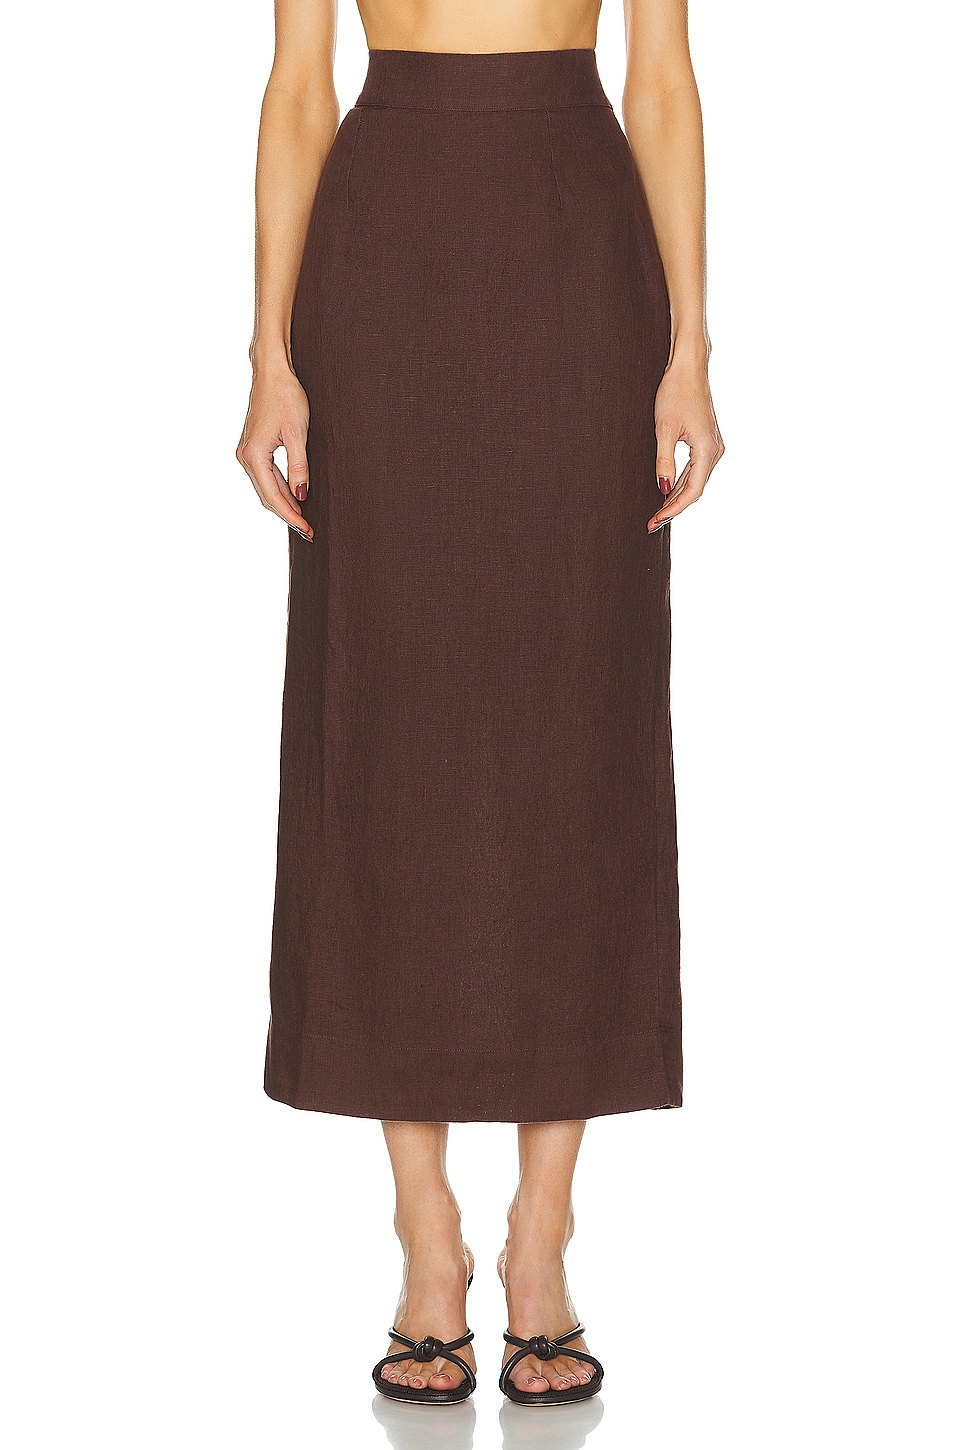 Image 1 of Posse Emma Pencil Skirt in Chocolate